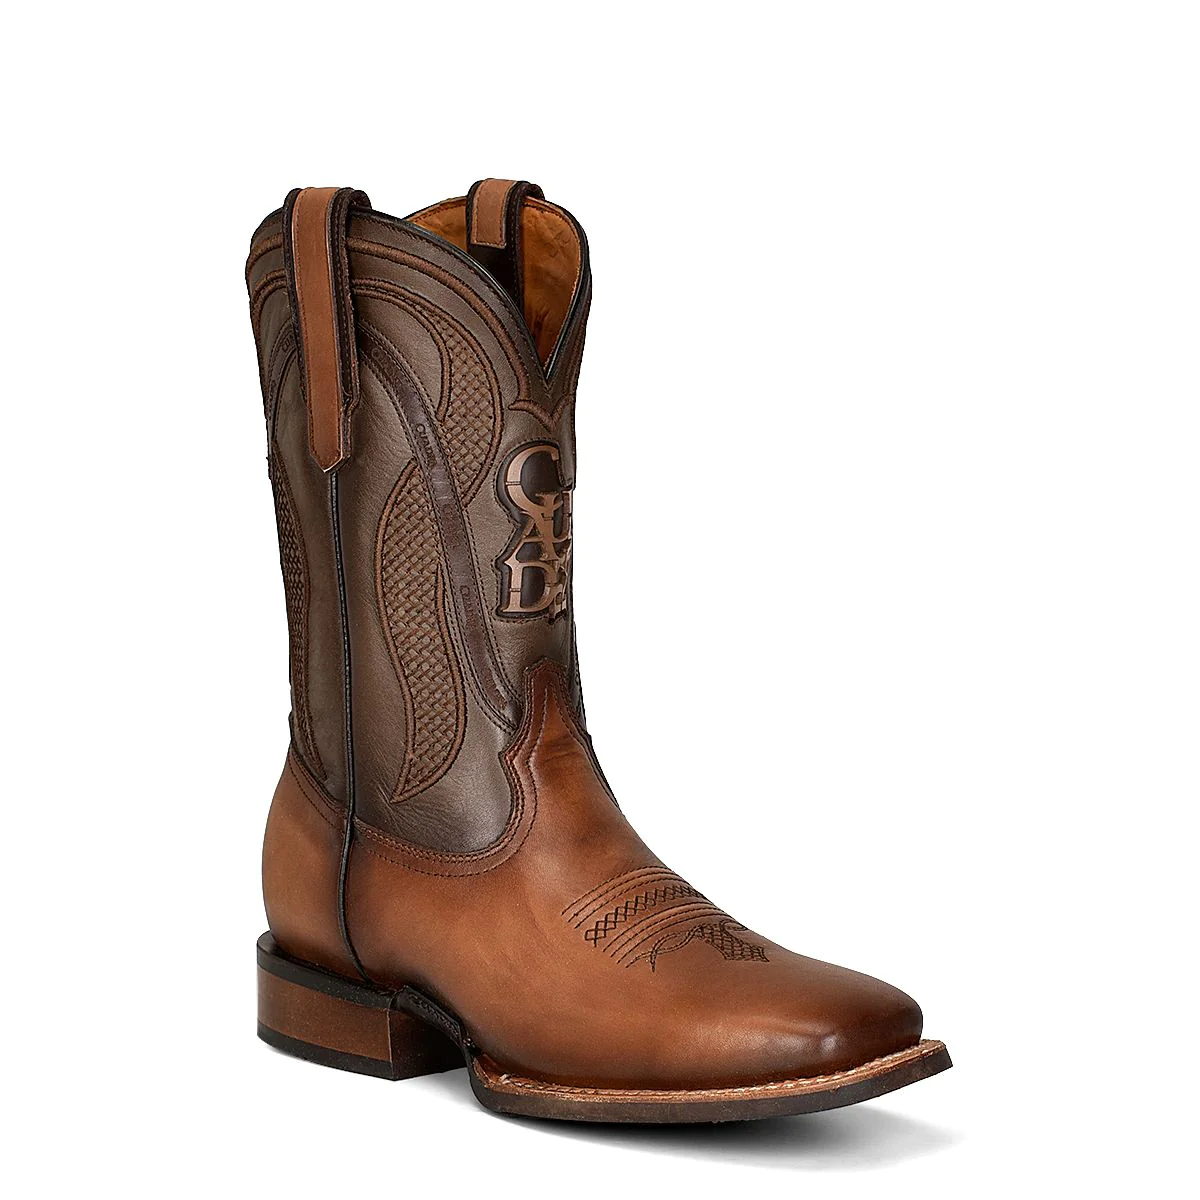 Rodeo cowboy honey brown leather boots (1)